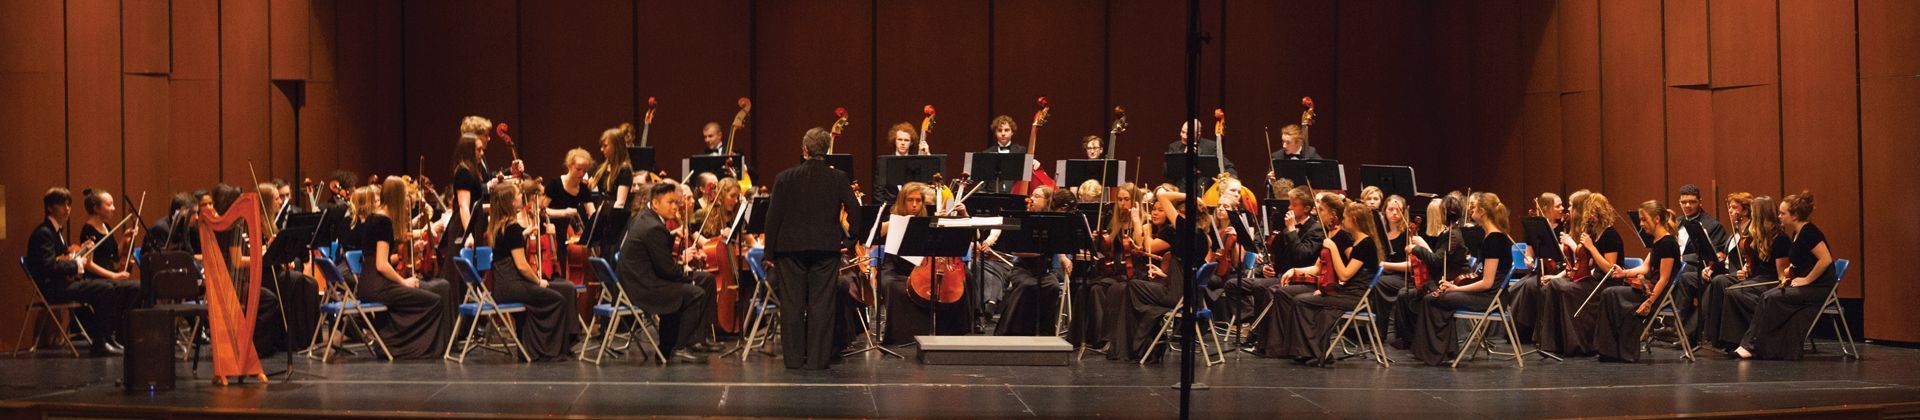 photo of high school orchestra